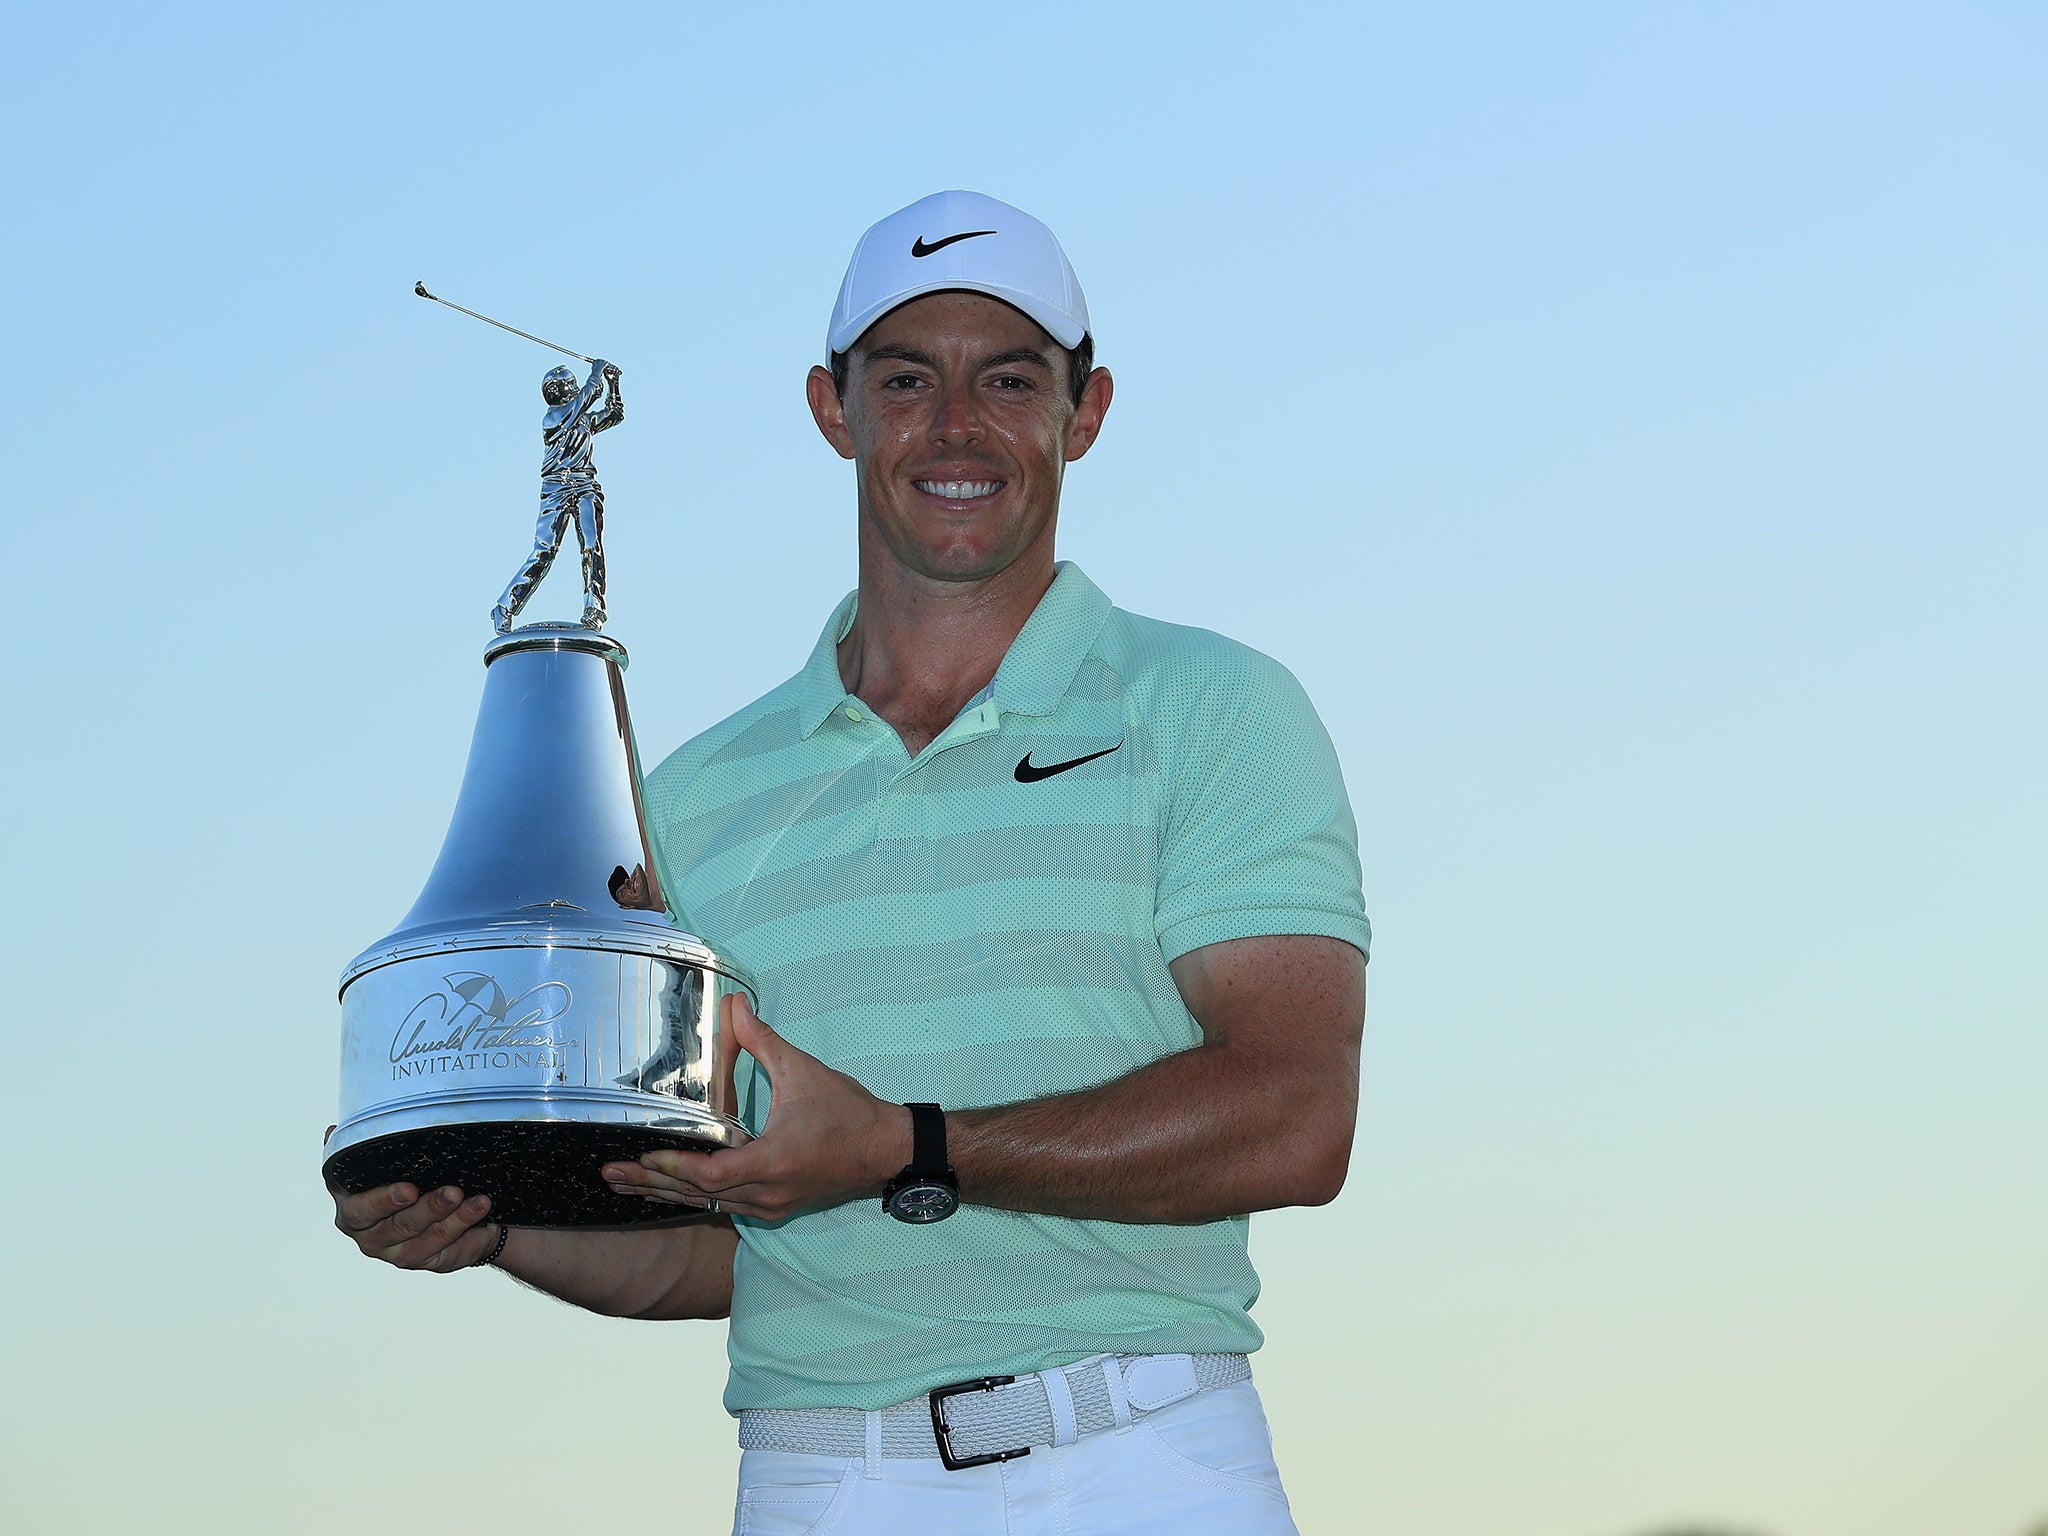 McIlroy clinched his first victory since September 2016 - on the same day as Arnold Palmer's death